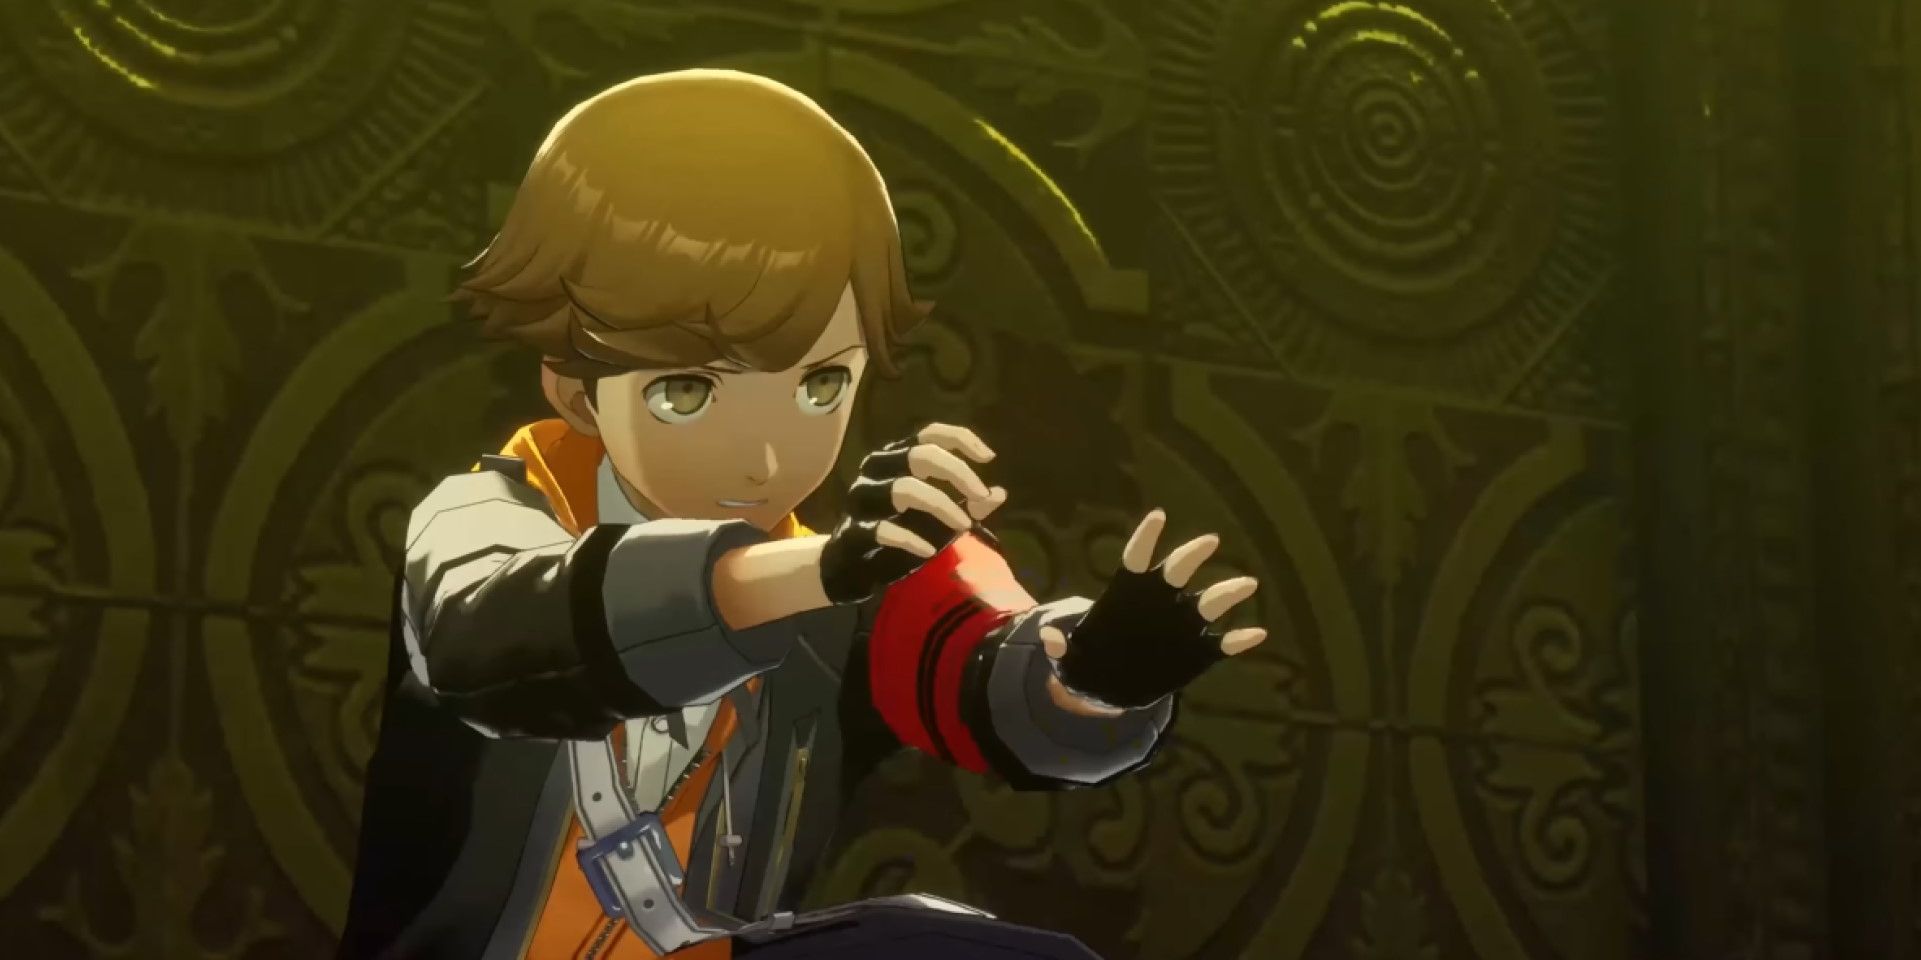 Ken stands with his hands out in front of him, as if casting a spell, in a screenshot from Persona 3 Reload.